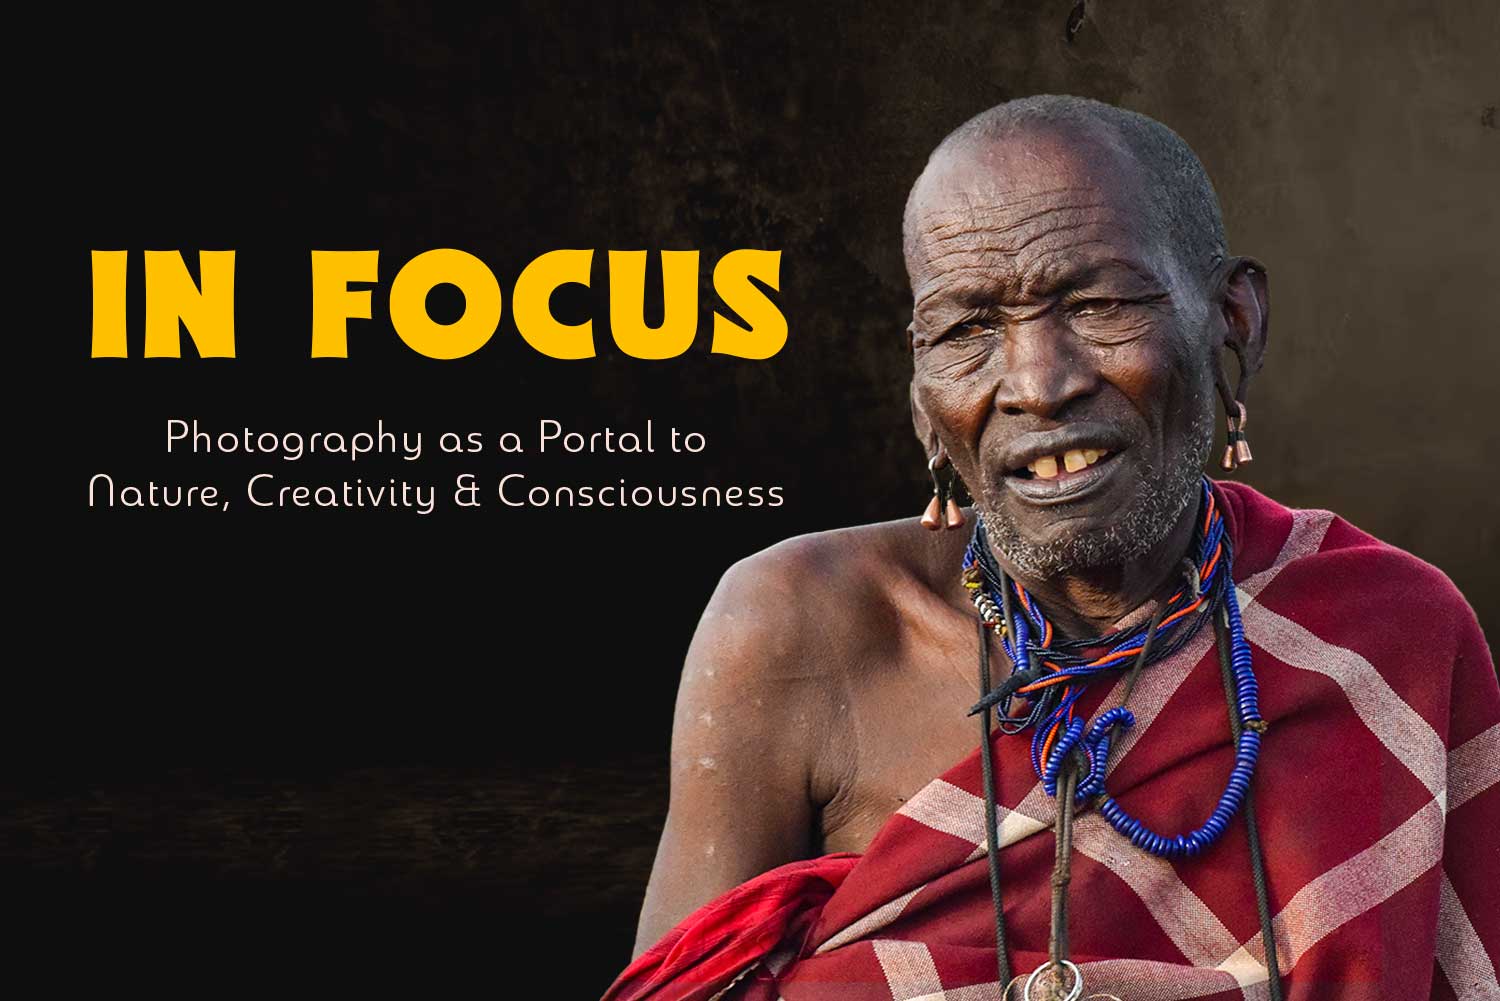 In Focus: Photography as a Portal to Nature, Creativity & Consciousness